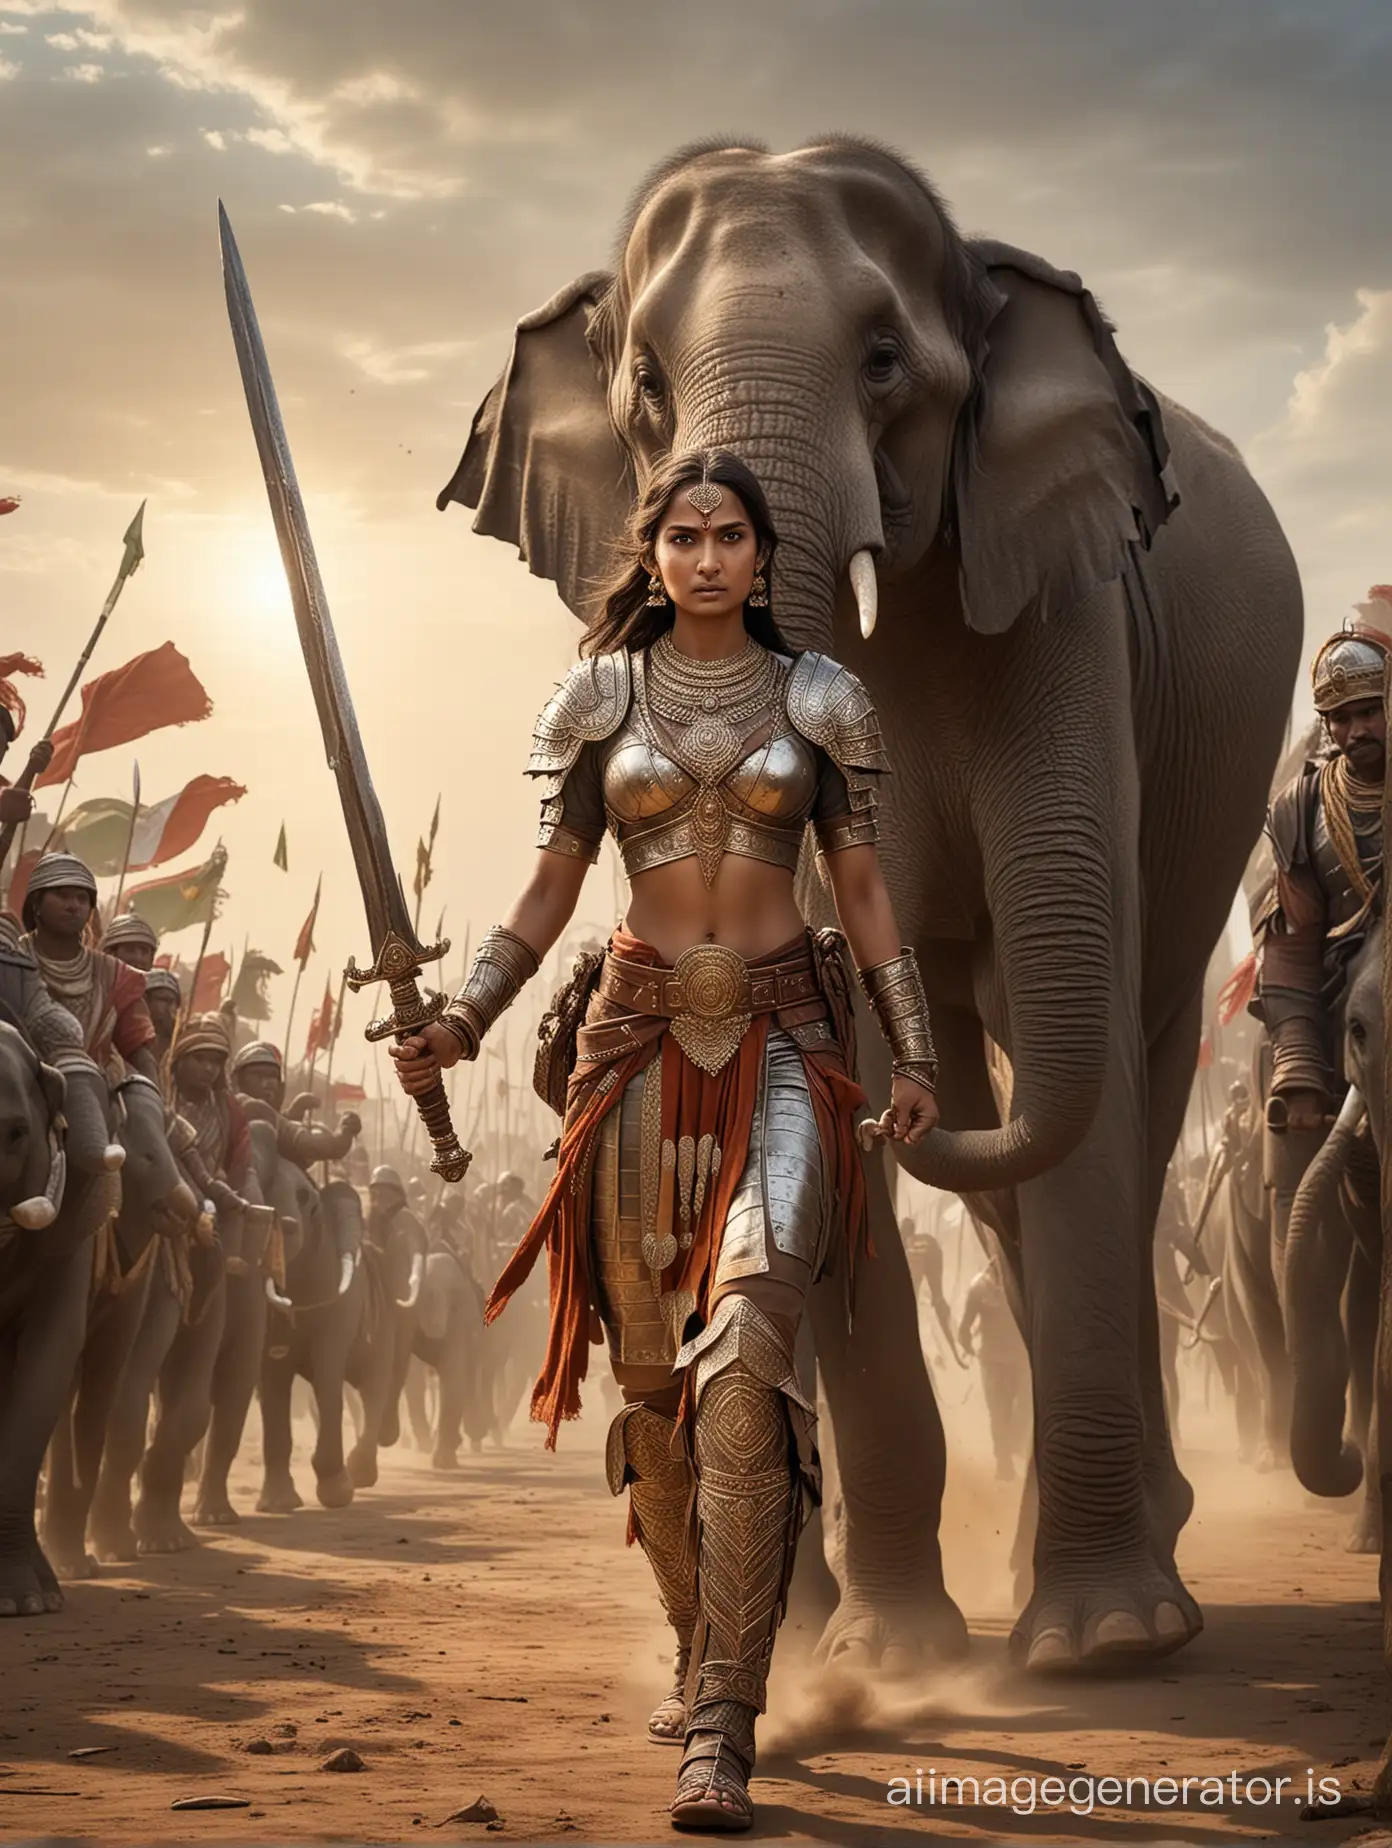 A brave Indian woman warrior, dressed in ancient armor and holding a shining sword, stands proudly on her magnificent elephant as they rush into battle. Behind her, a large group of foot soldiers marches forward, prepared to fight the enemy. The warrior's strong face shows her courage and dedication to protecting her homeland and people.